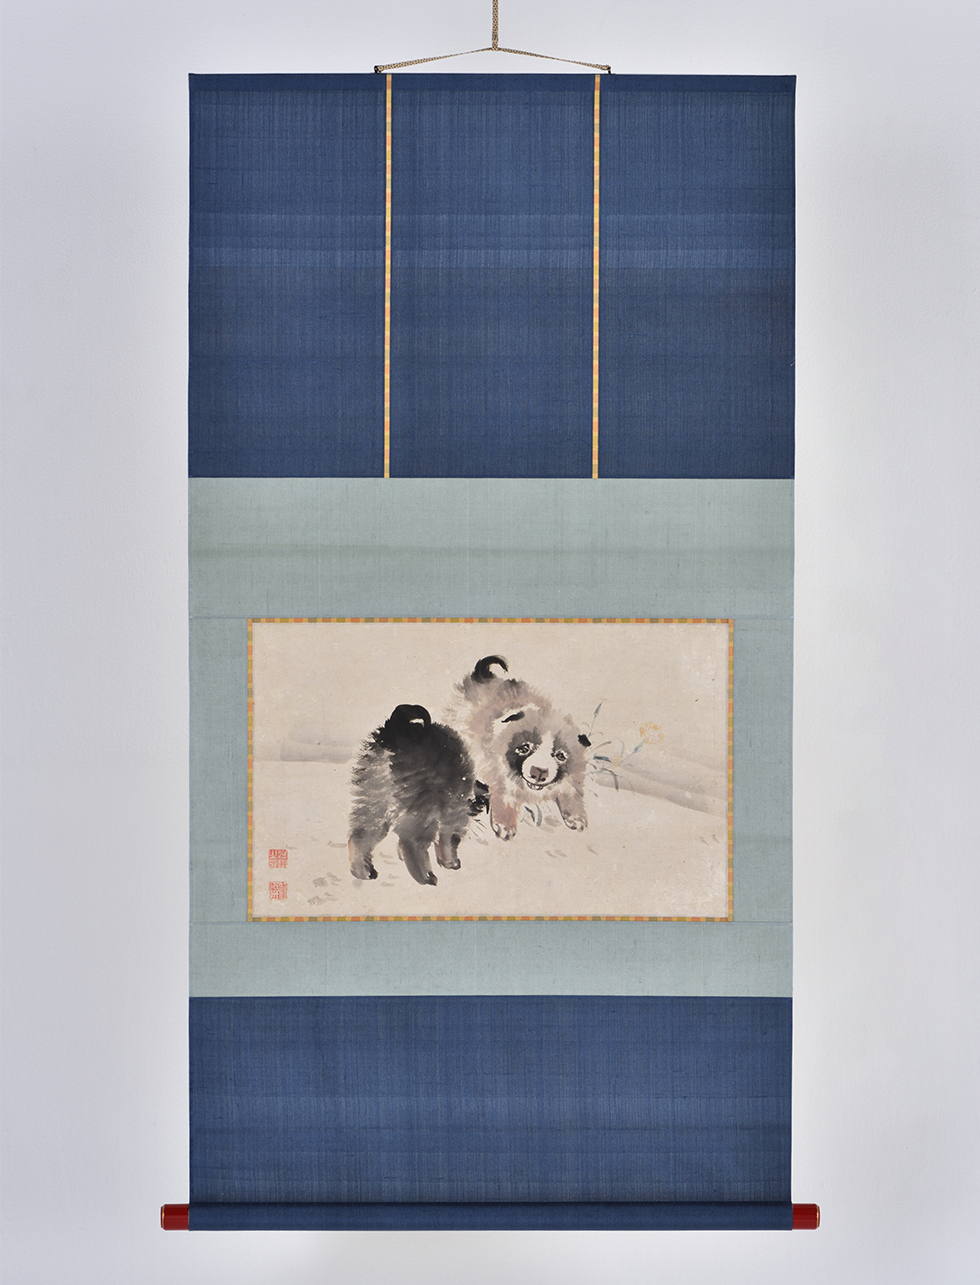 Hanging scroll “Puppies” painted by Maruyama Ōkyo (1733-1795)